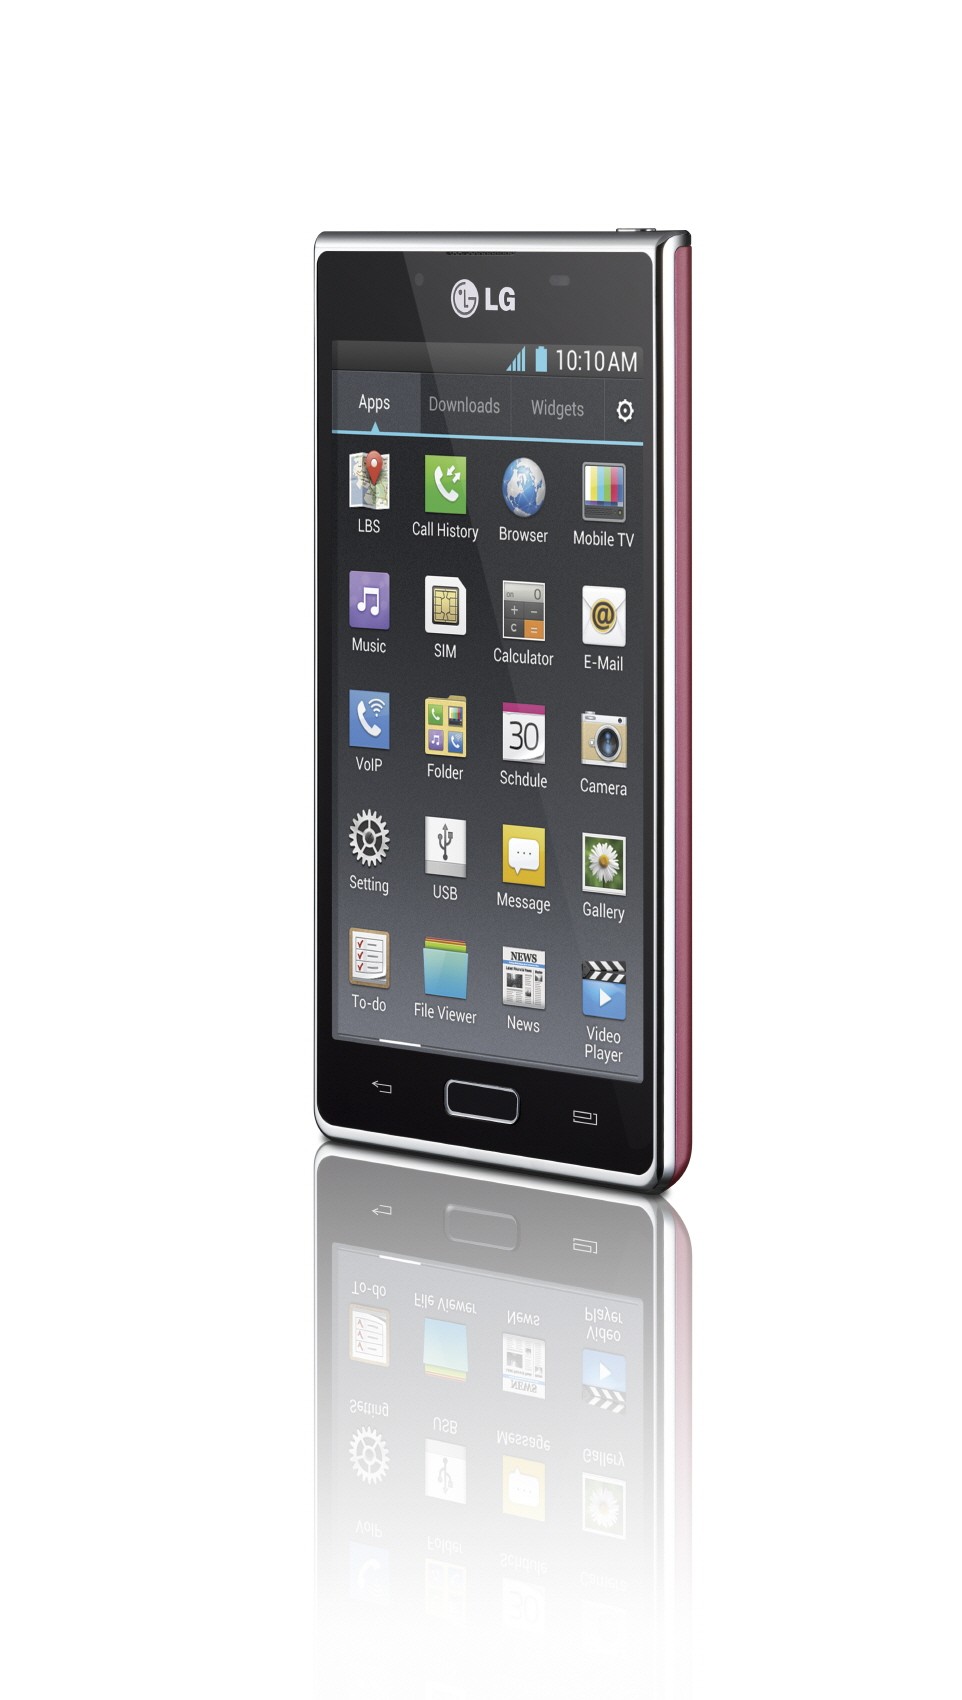 Front view of the LG Optimus L7 with apps displayed on the screen while facing 15 degrees to the left